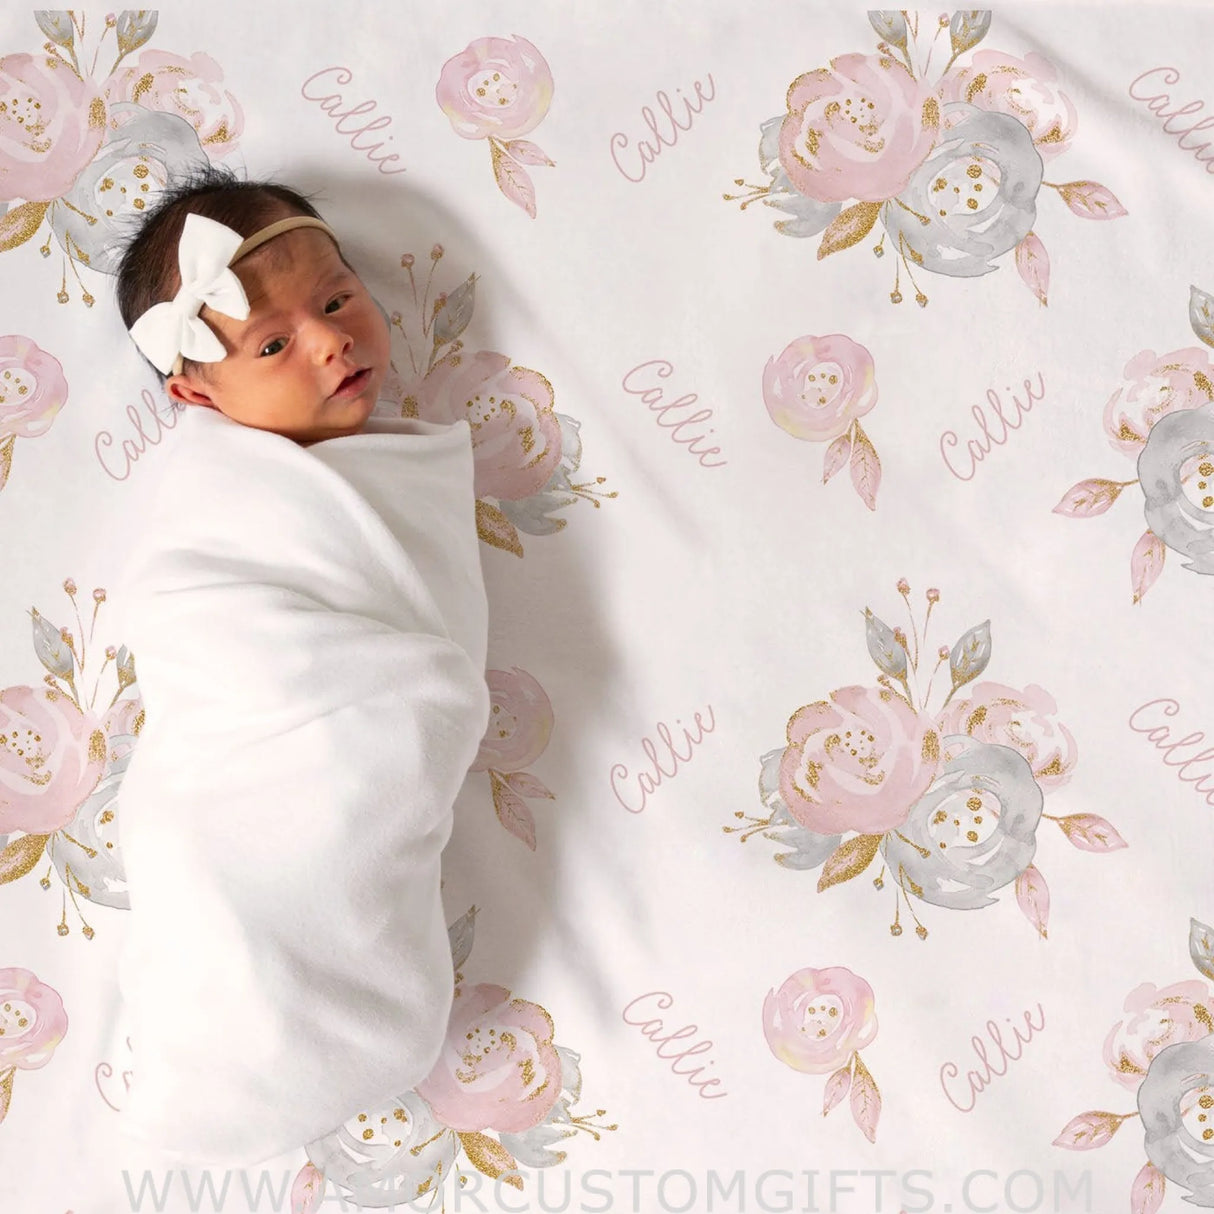 Blankets USA MADE Personalized Baby Girl Name Blanket, Pink and Gray Floral baby blanket